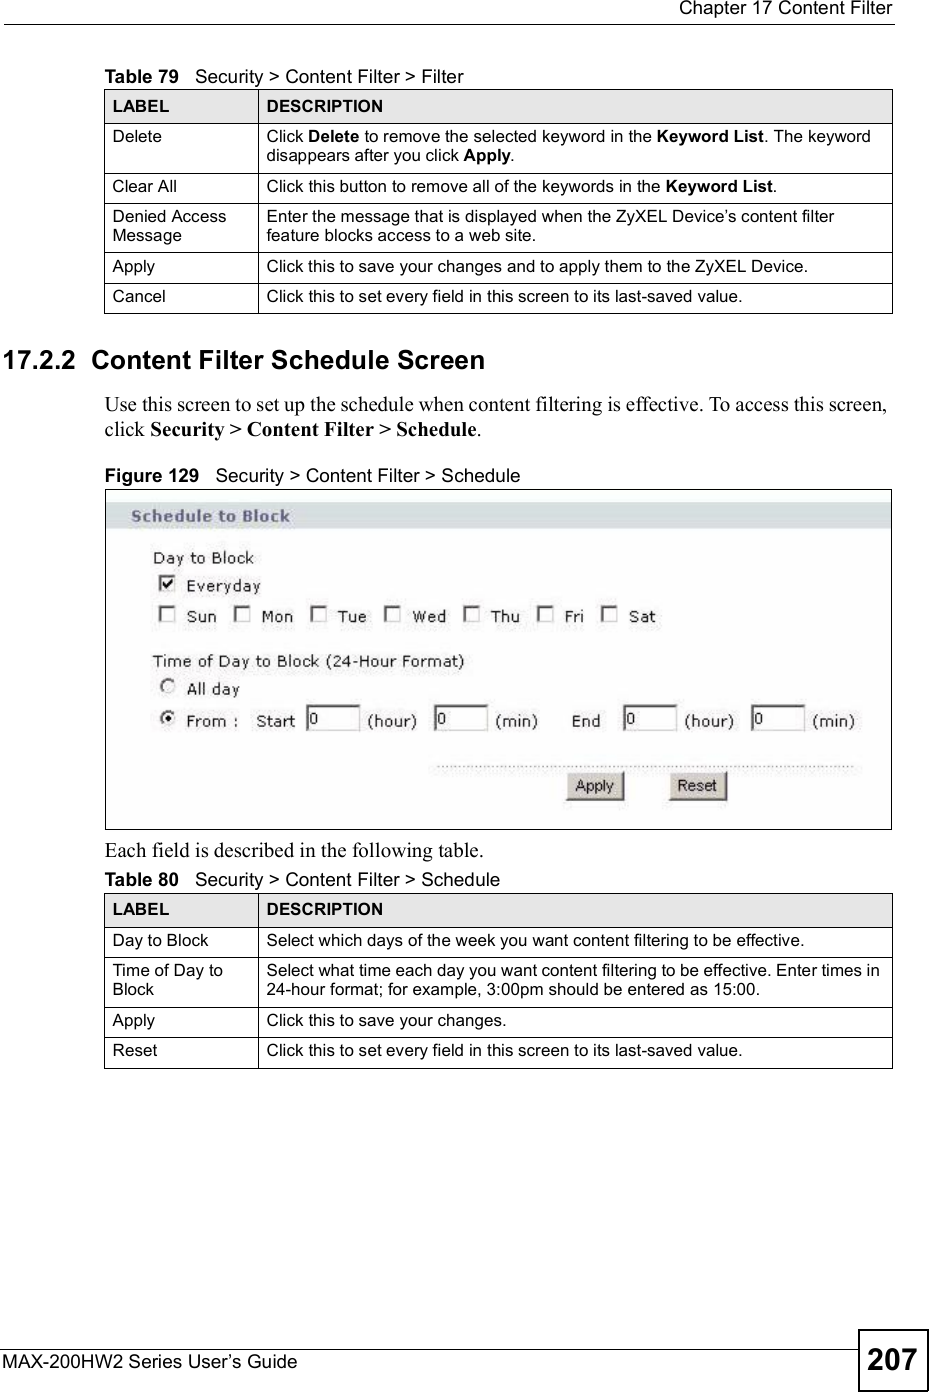  Chapter 17Content FilterMAX-200HW2 Series User s Guide 20717.2.2  Content Filter Schedule ScreenUse this screen to set up the schedule when content filtering is effective. To access this screen, click Security &gt; Content Filter &gt; Schedule.Figure 129   Security &gt; Content Filter &gt; ScheduleEach field is described in the following table.Delete Click Delete to remove the selected keyword in the Keyword List. The keyword disappears after you click Apply.Clear All Click this button to remove all of the keywords in the Keyword List.Denied Access MessageEnter the message that is displayed when the ZyXEL Device s content filter feature blocks access to a web site.Apply Click this to save your changes and to apply them to the ZyXEL Device.Cancel Click this to set every field in this screen to its last-saved value.Table 79   Security &gt; Content Filter &gt; FilterLABEL DESCRIPTIONTable 80   Security &gt; Content Filter &gt; ScheduleLABEL DESCRIPTIONDay to Block Select which days of the week you want content filtering to be effective.Time of Day to BlockSelect what time each day you want content filtering to be effective. Enter times in 24-hour format; for example, 3:00pm should be entered as 15:00.Apply Click this to save your changes.Reset Click this to set every field in this screen to its last-saved value.